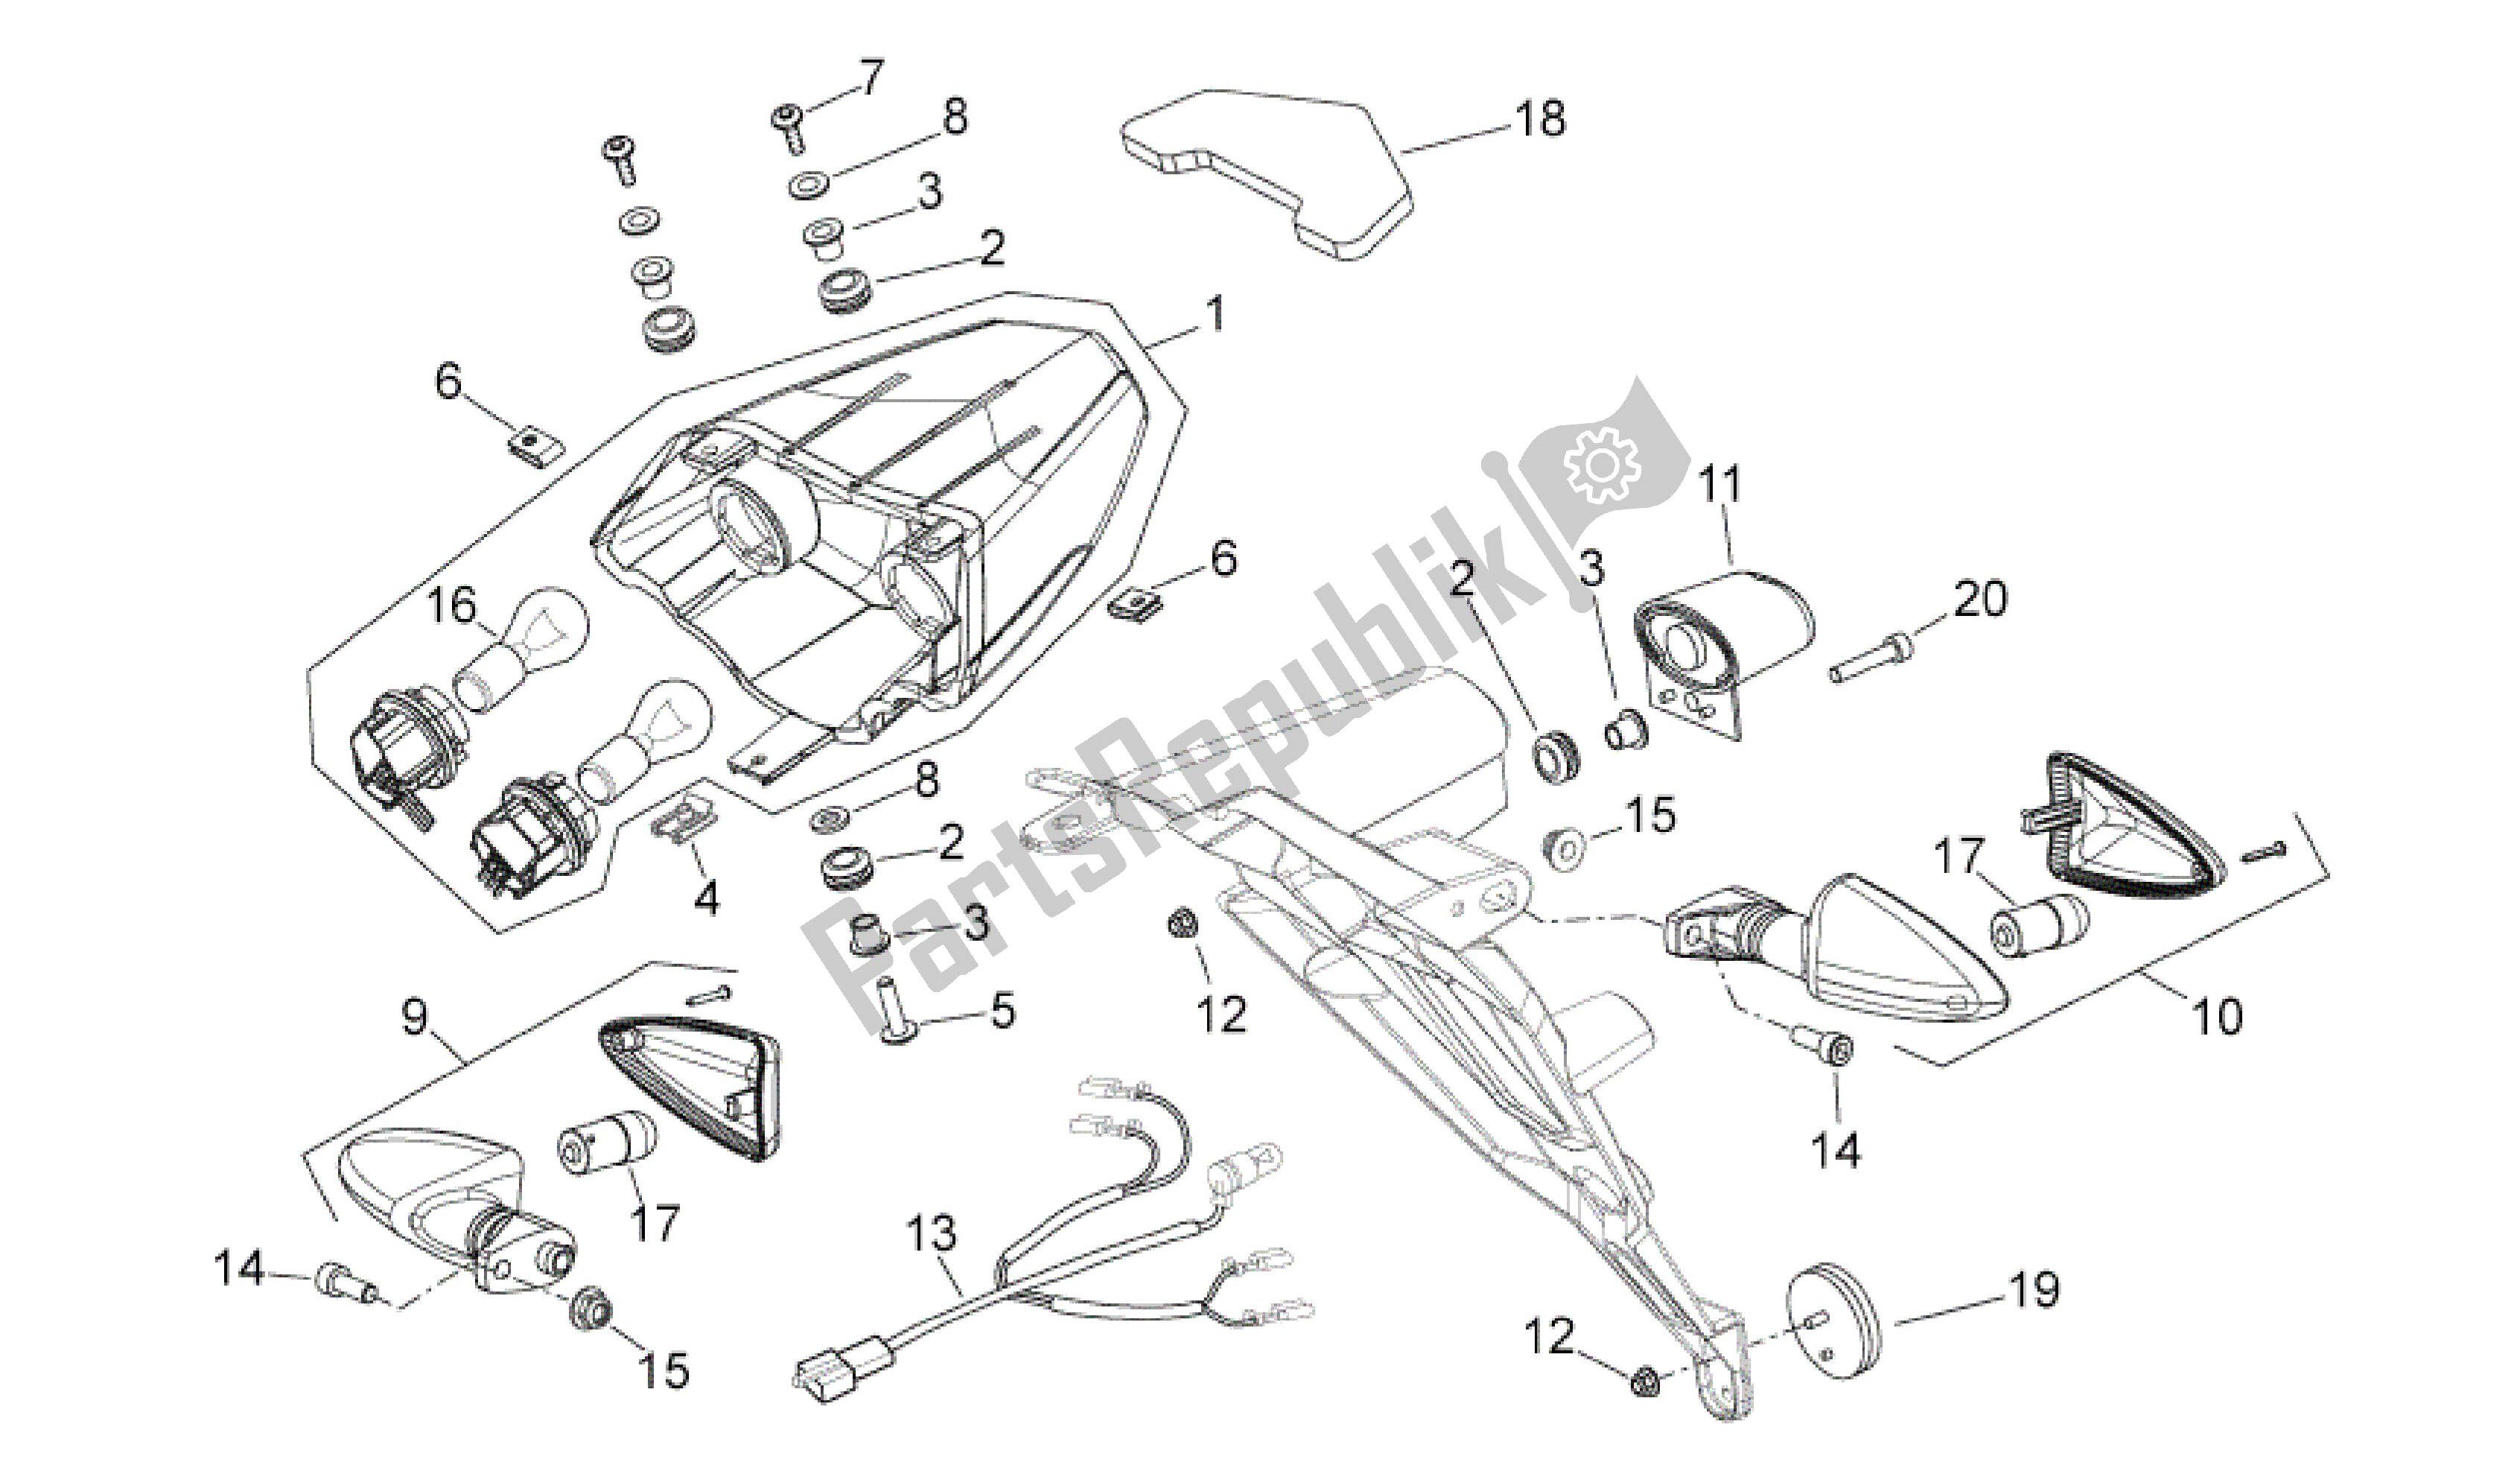 All parts for the Rear Lights of the Aprilia Shiver 750 2011 - 2013